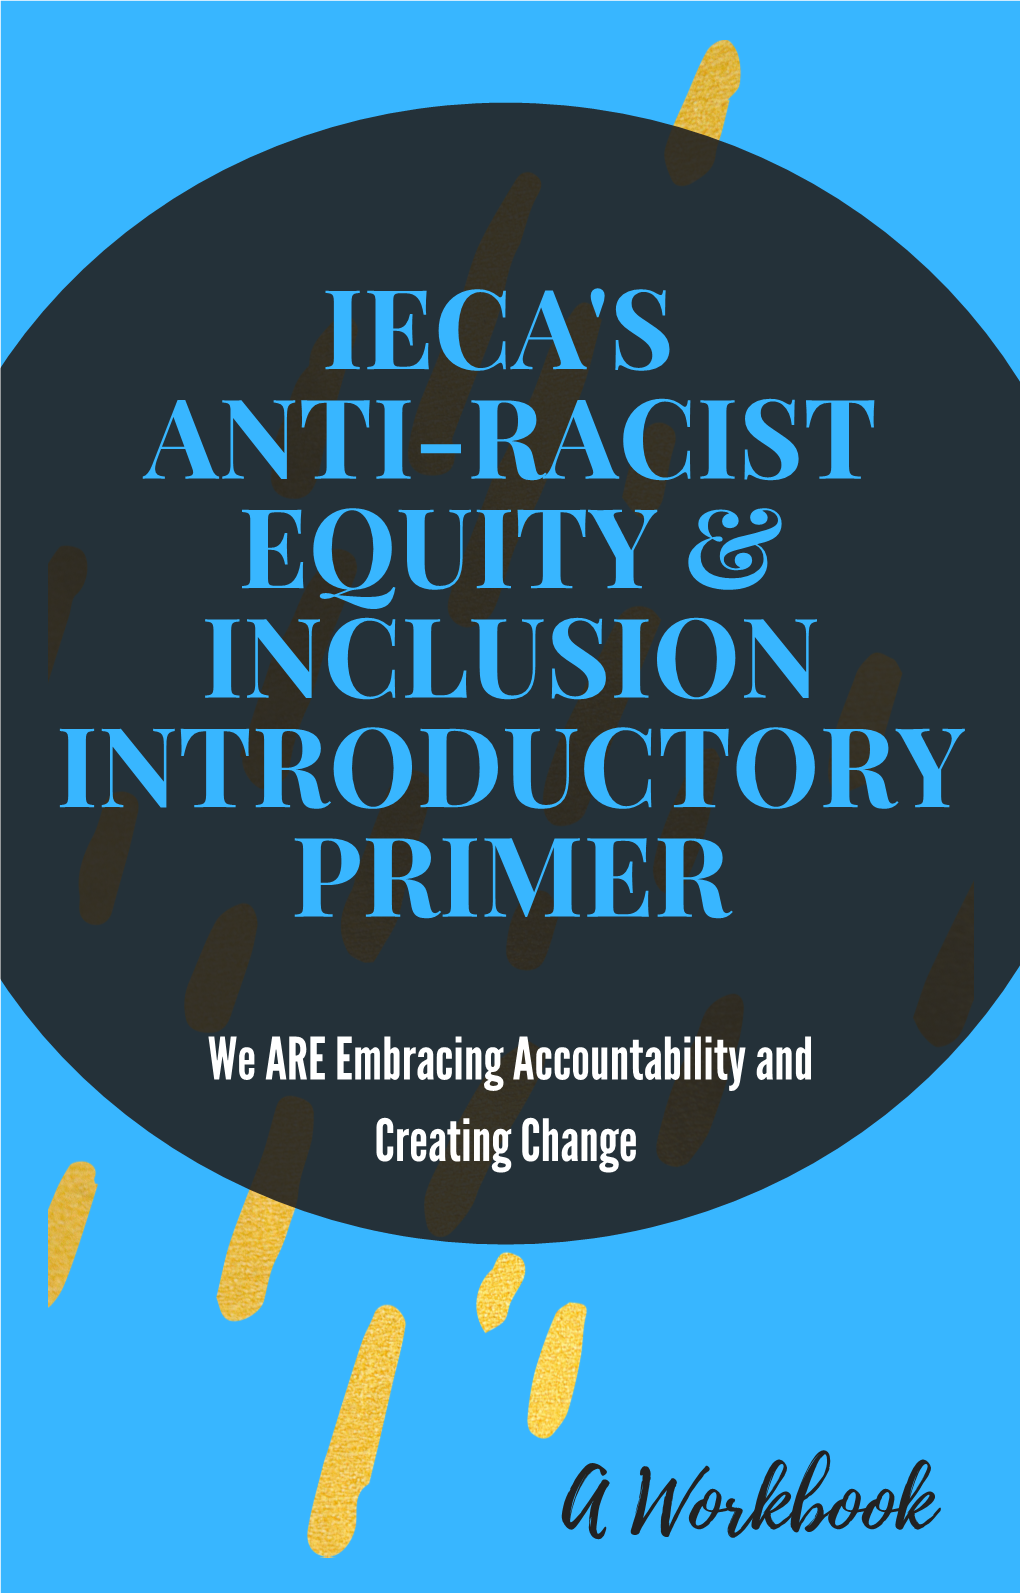 Ieca's Anti-Racist Equity & Inclusion Introductory